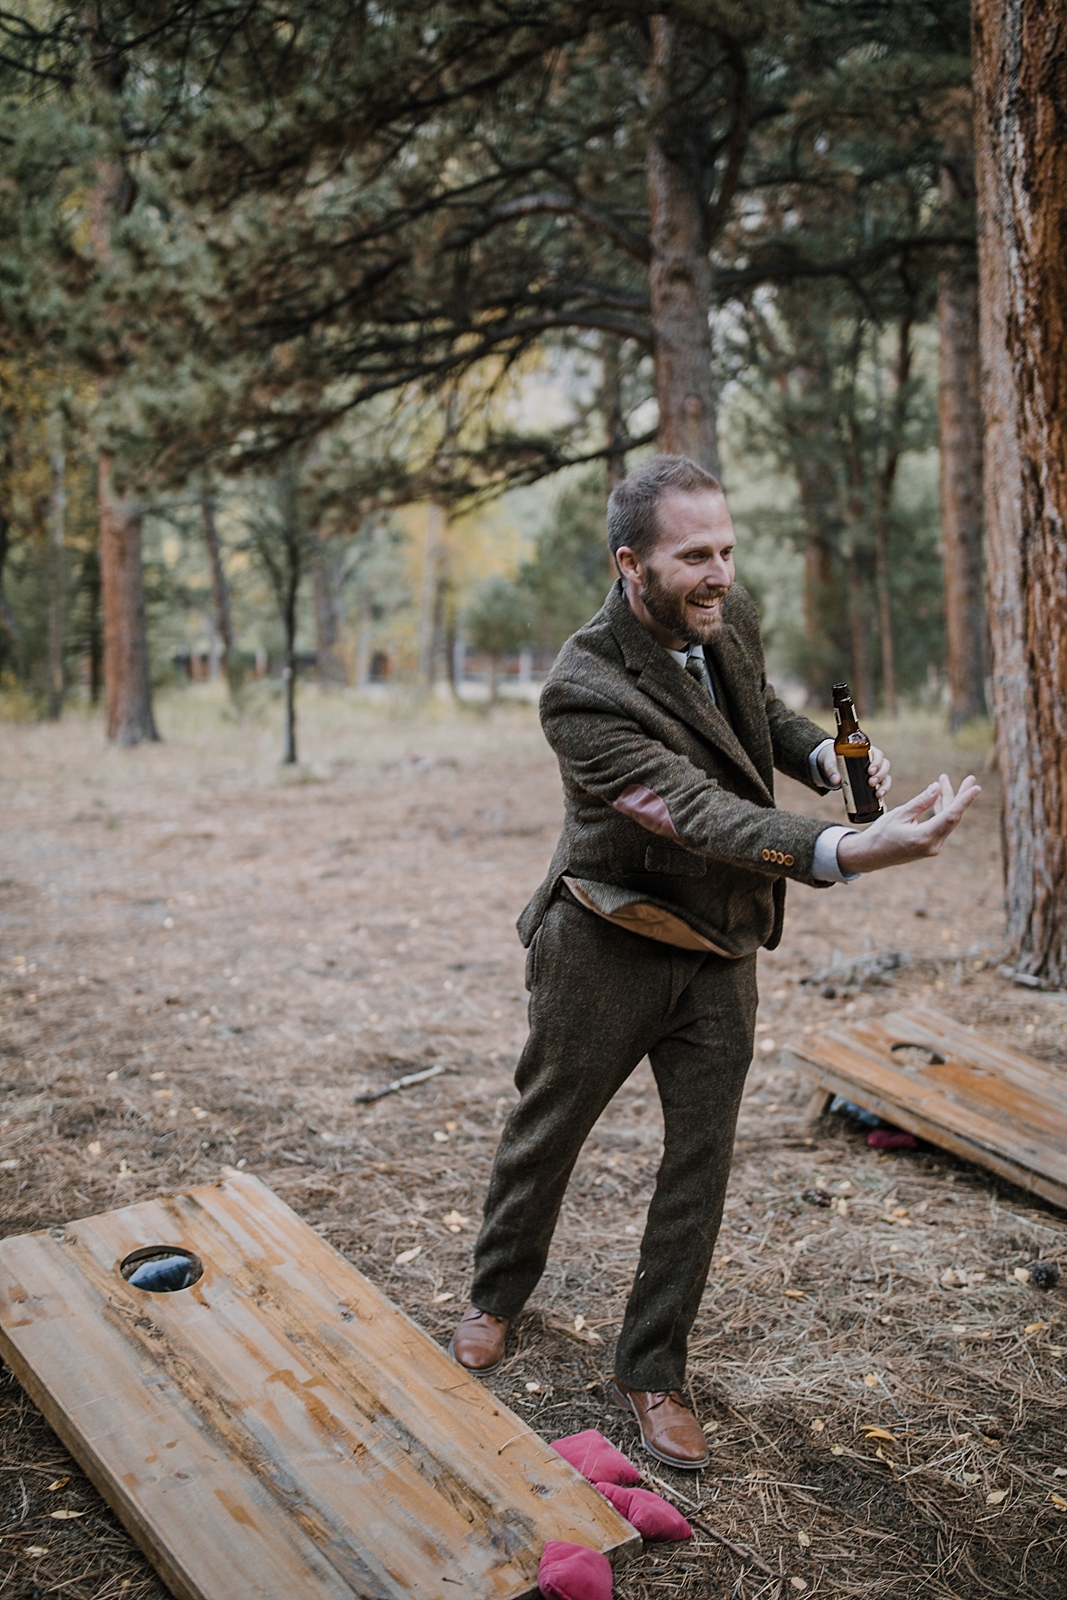 wedding yard games, couple hiking, norway elopement, post elopement celebration, wedding in the woods, buena vista elopement, buena vista wedding, nathrop colorado wedding, elope with your dog